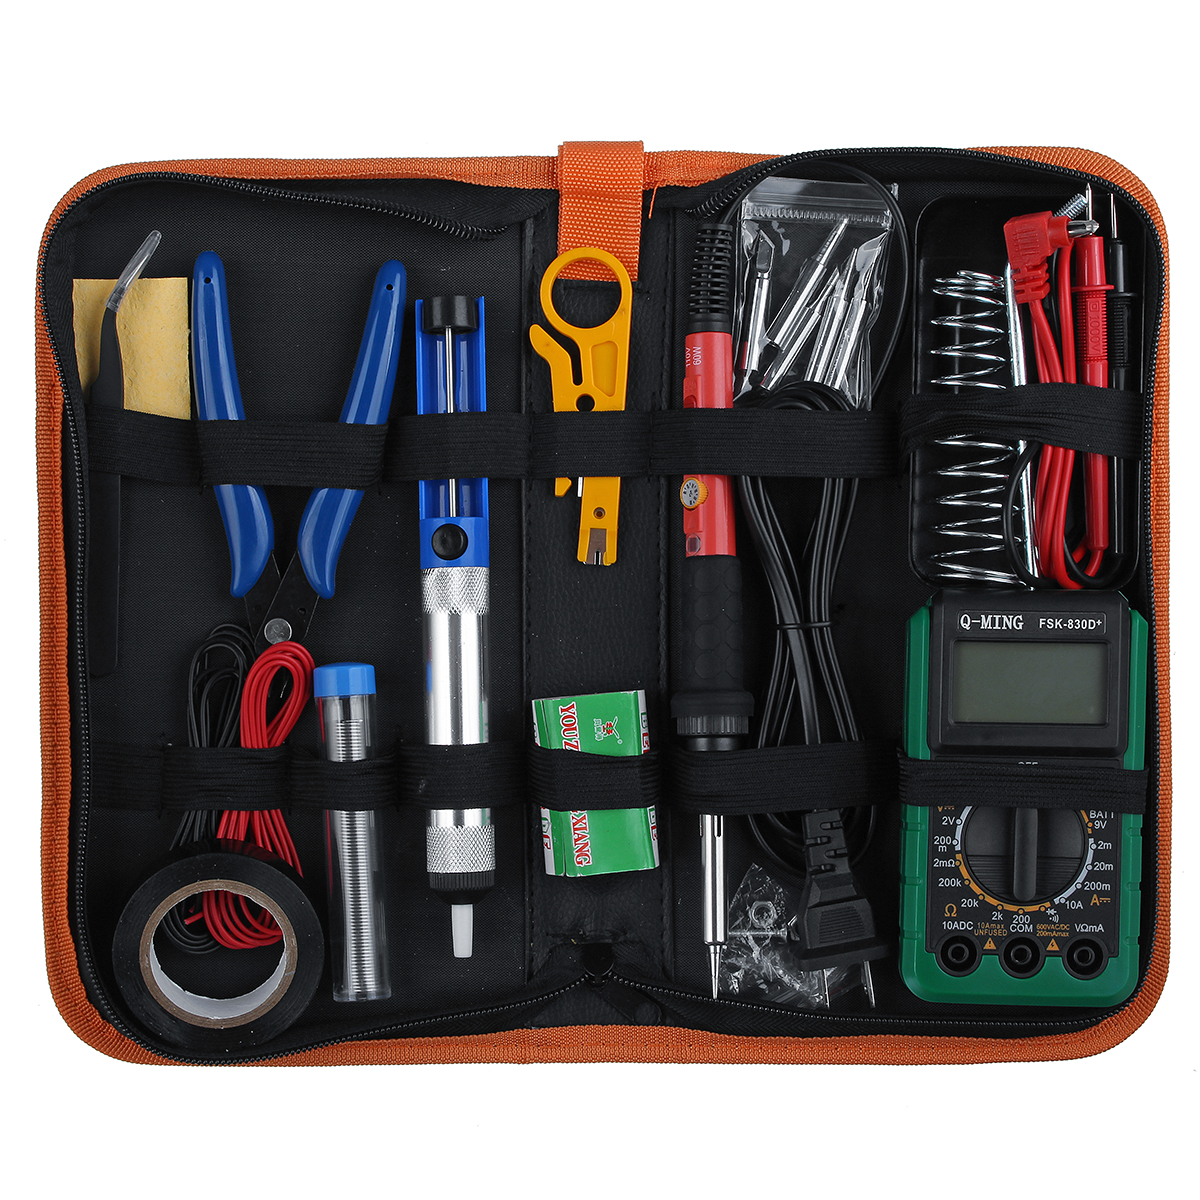 110V-60W-22Pcs-Electric-Adjustable-Temperature-Soldering-Iron-Kit-Welding-Tool-With-Multimeter-1656185-1